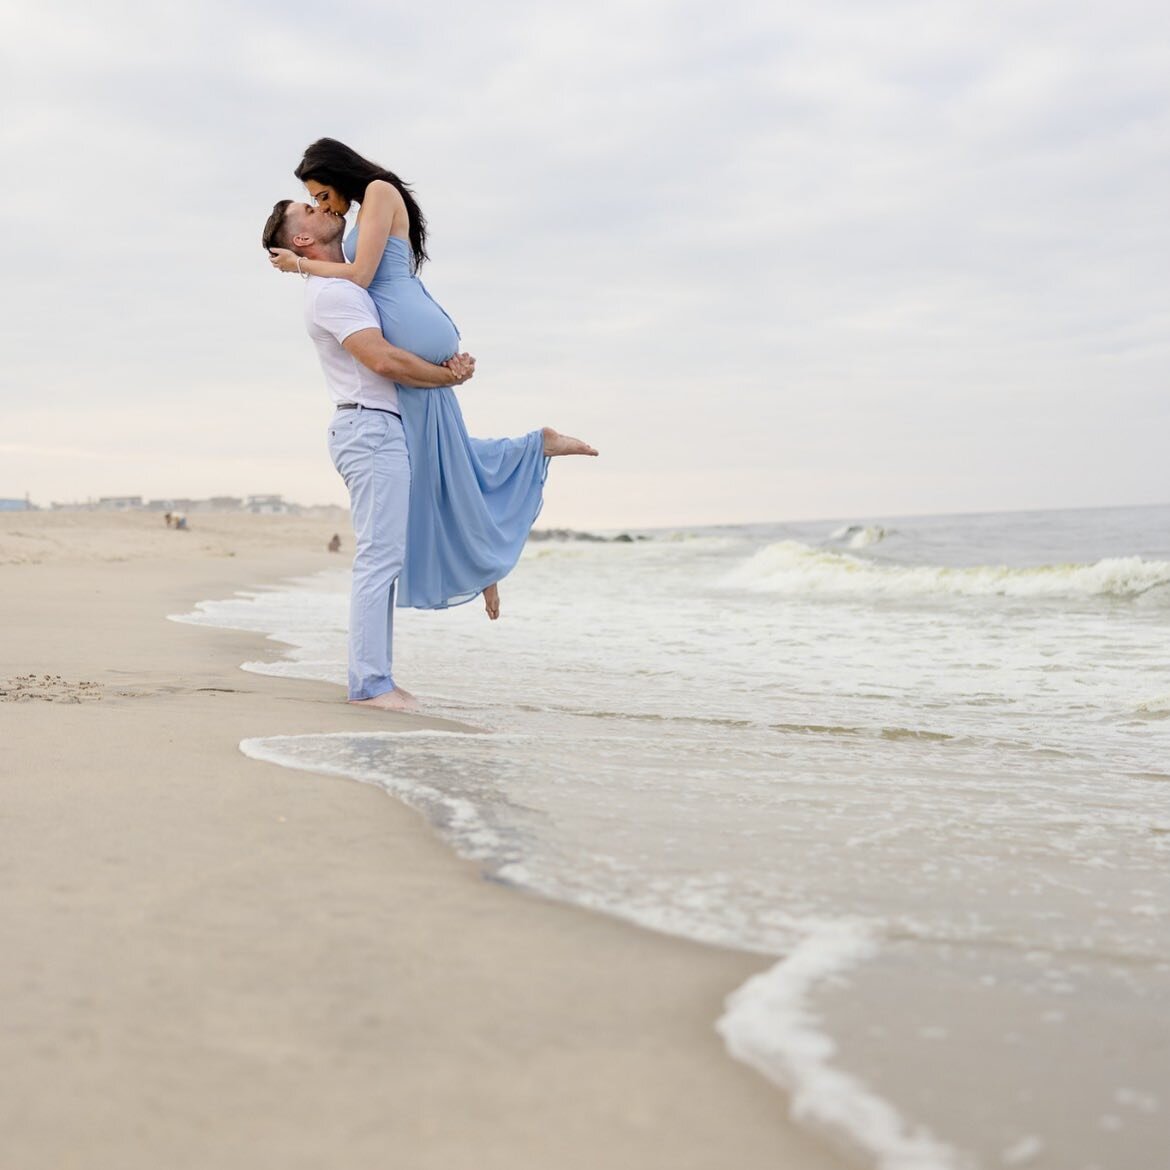 A life lived in love is a life that&rsquo;s never dull

#engagement #engagementshoot #photography #photo #ocean #scenic #beach #couple #love #inlove #wedding #bride #groom #djservices #dj #mc #cinematography #eeg #evermor #forevermor

📸: @jay_martin